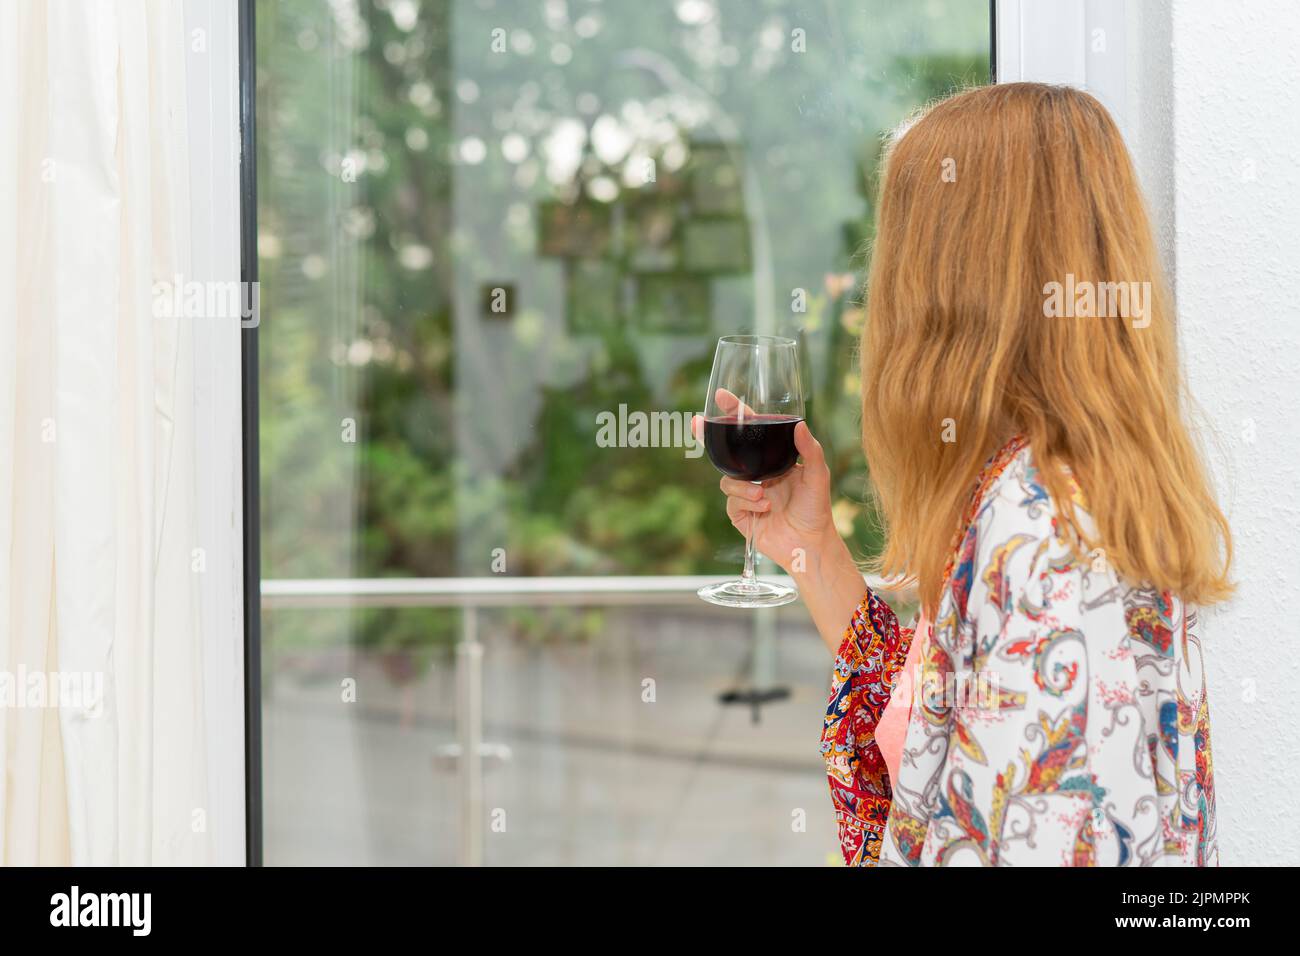 A woman in a colorful dressing gown stands at the window with a glass of drink Stock Photo